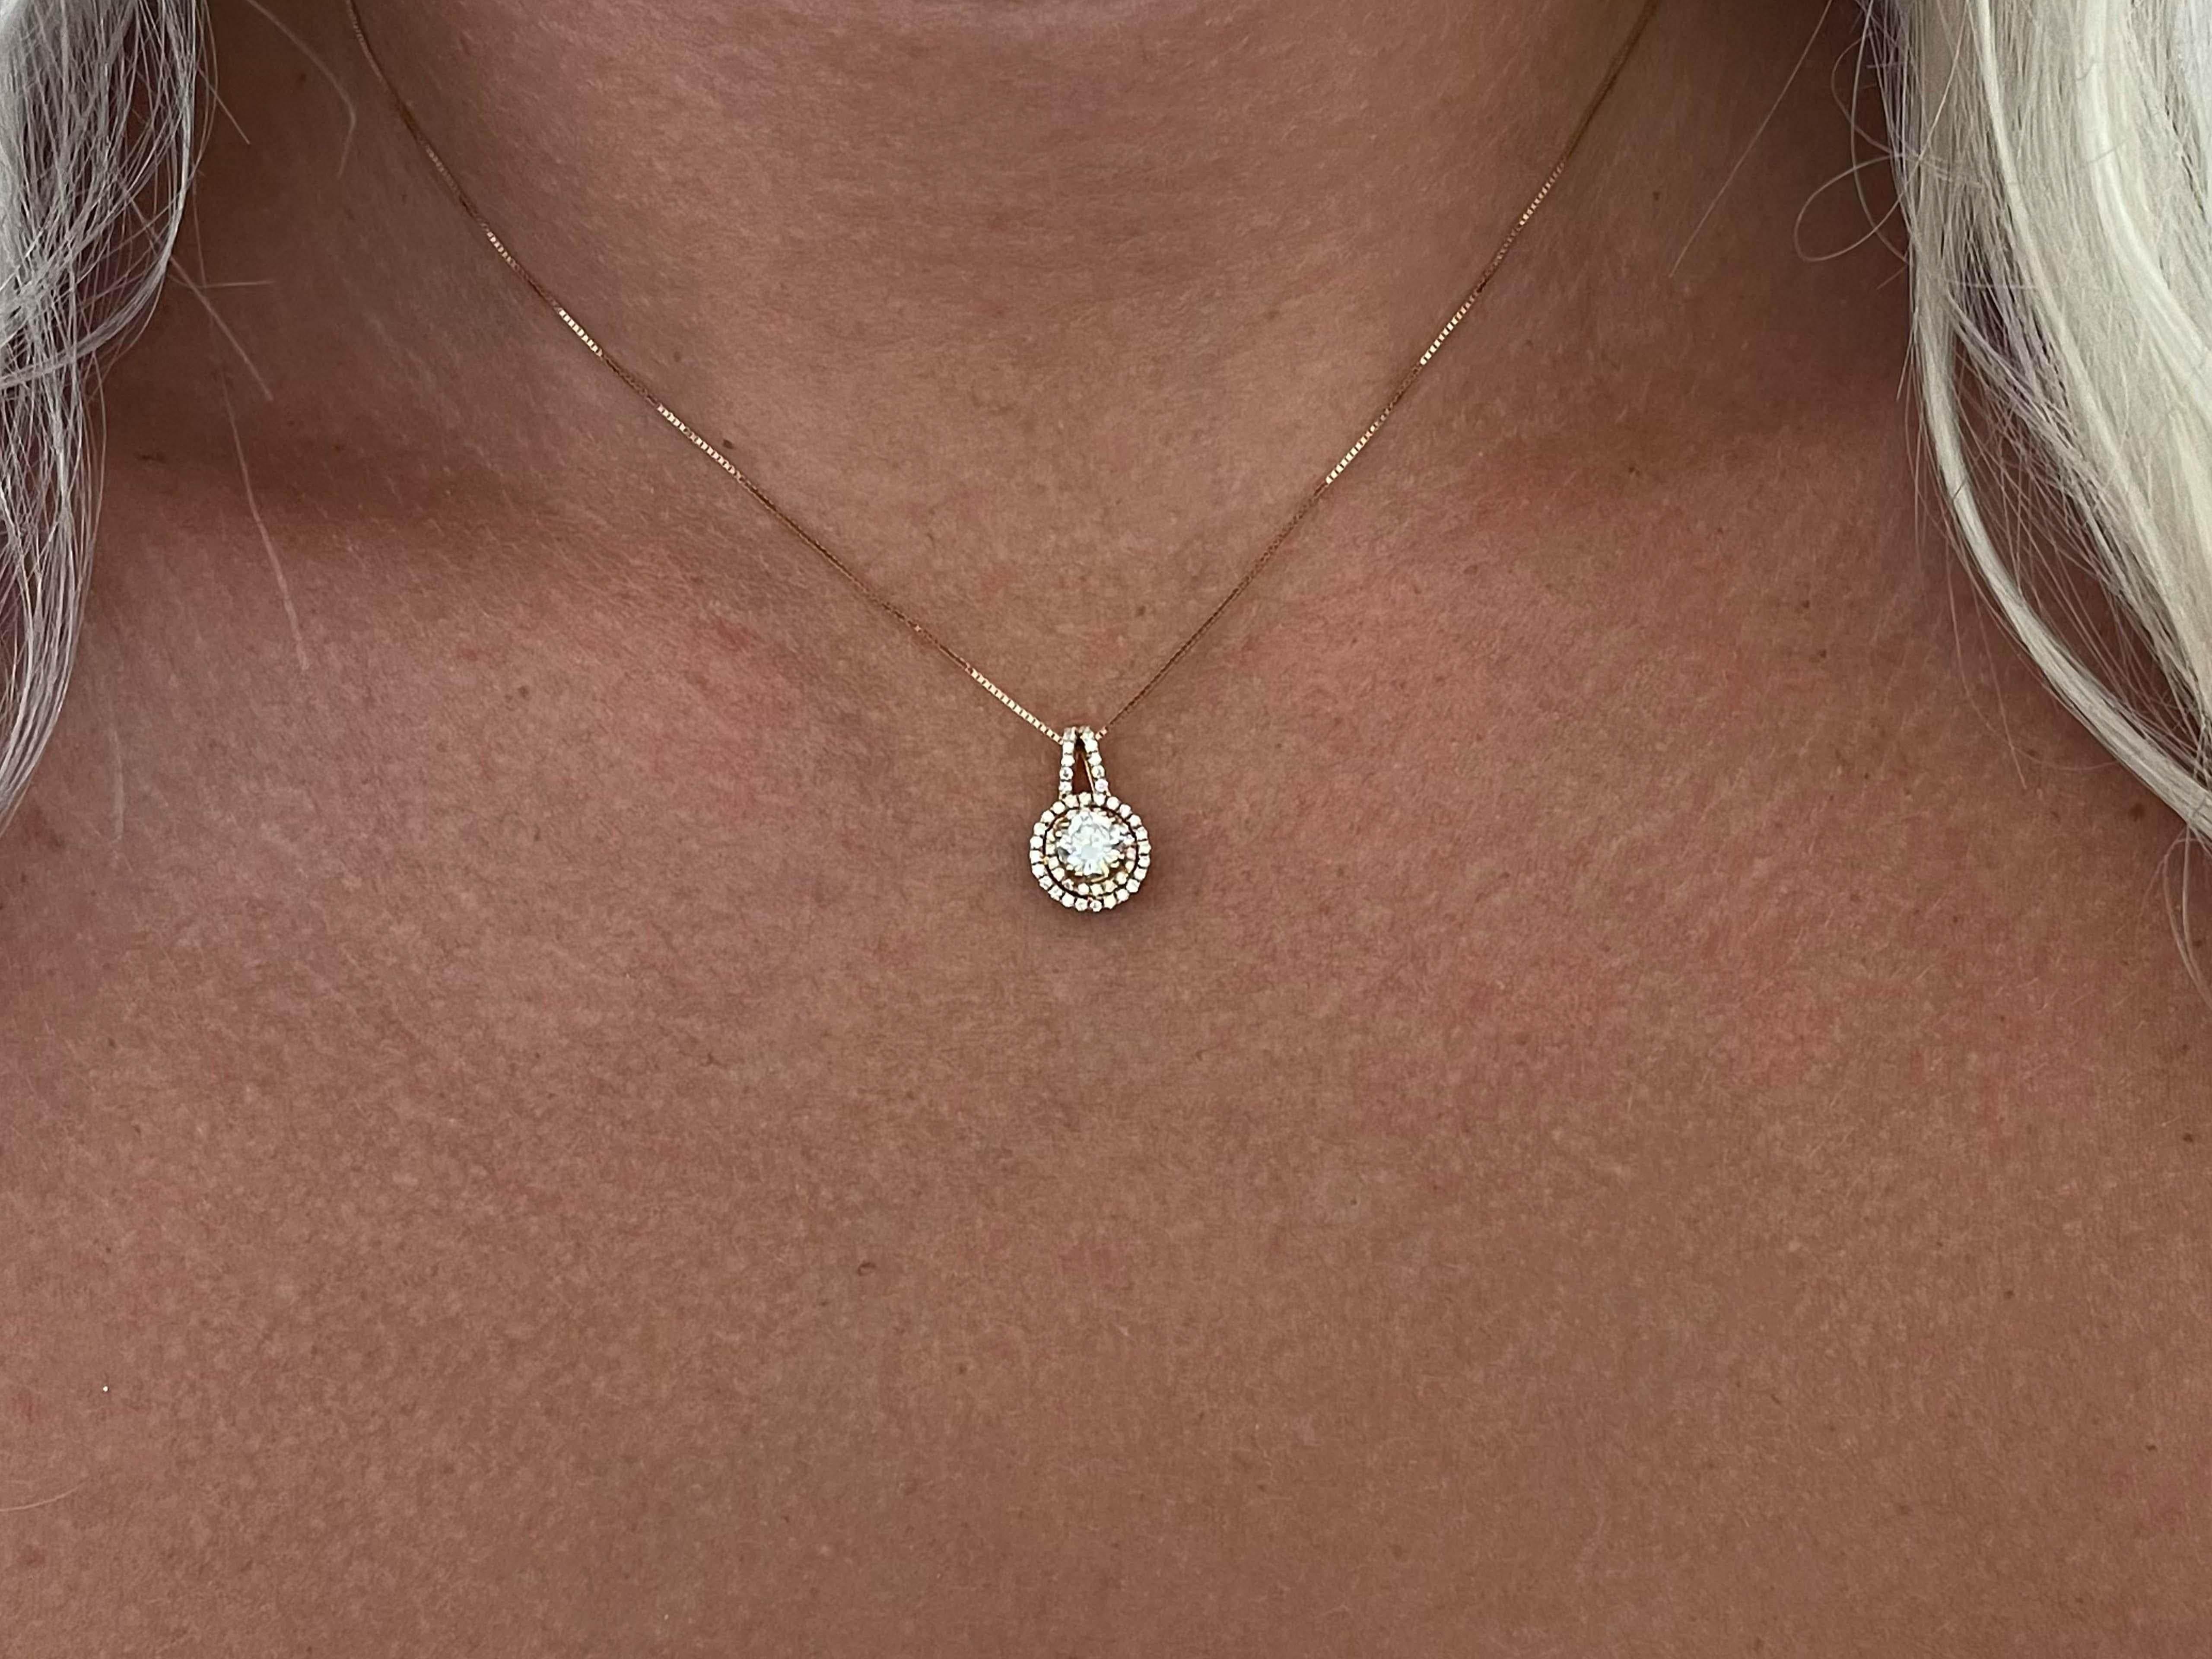 The center diamond is H in color and SI2 in clarity and weighs 0.52 carats. The pendant features an additional 54 round brilliant diamonds, G in color and VS in clarity, weighing 0.26 carats. Altogether the diamond weight is 0.78 carats. The pendant